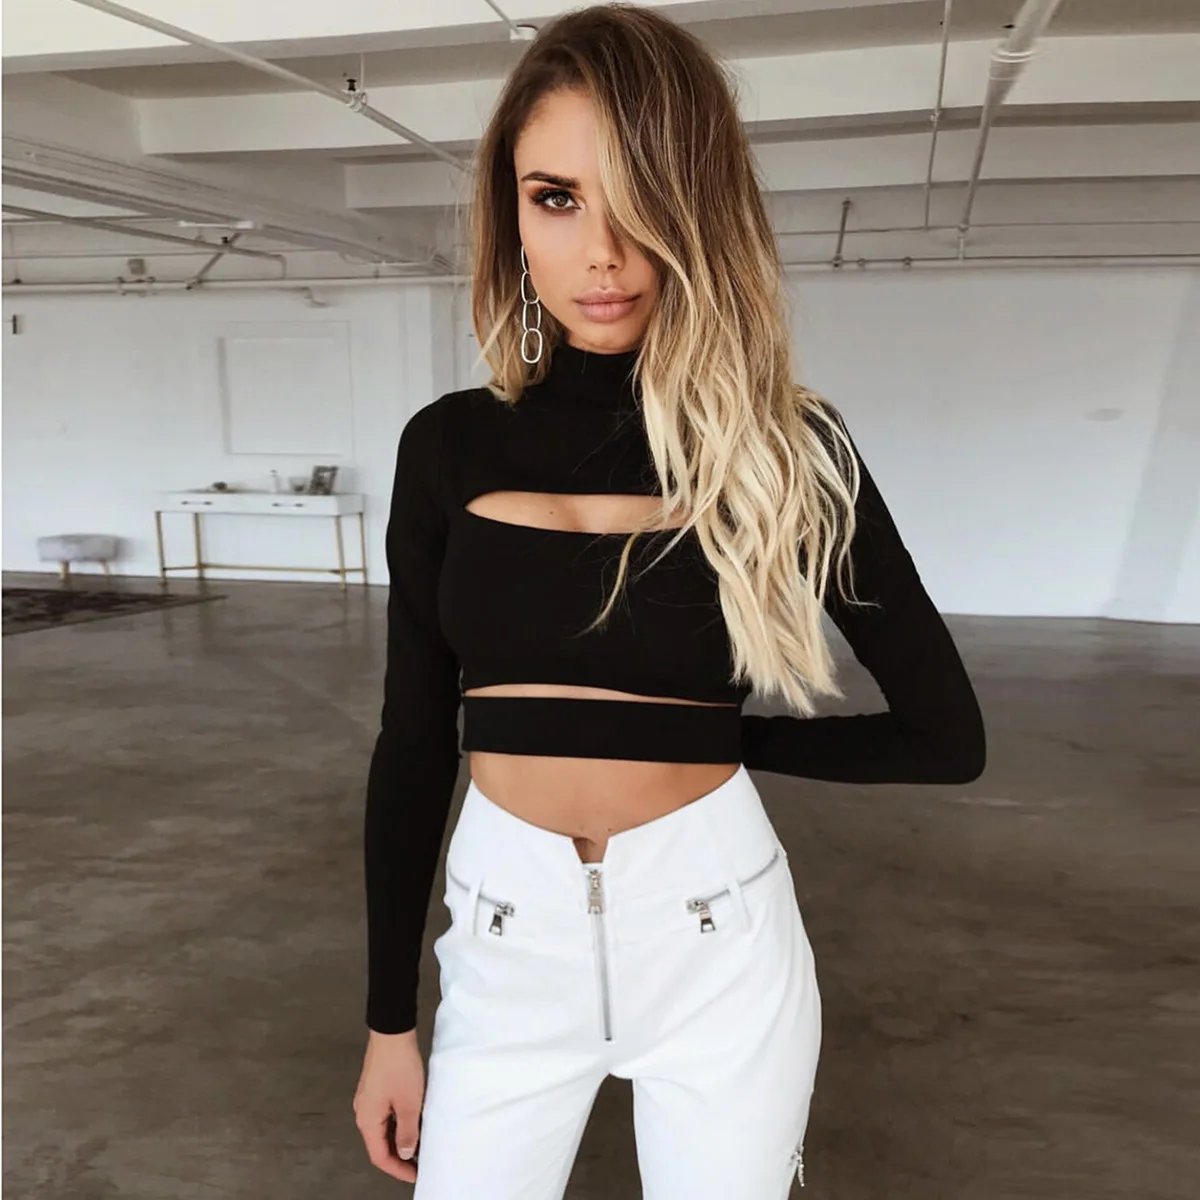 KOLLSEEY Brand New Arrival Fashion Cropped Navel T-Shirt Summer Women's Clothes Long Sleeves enlarge